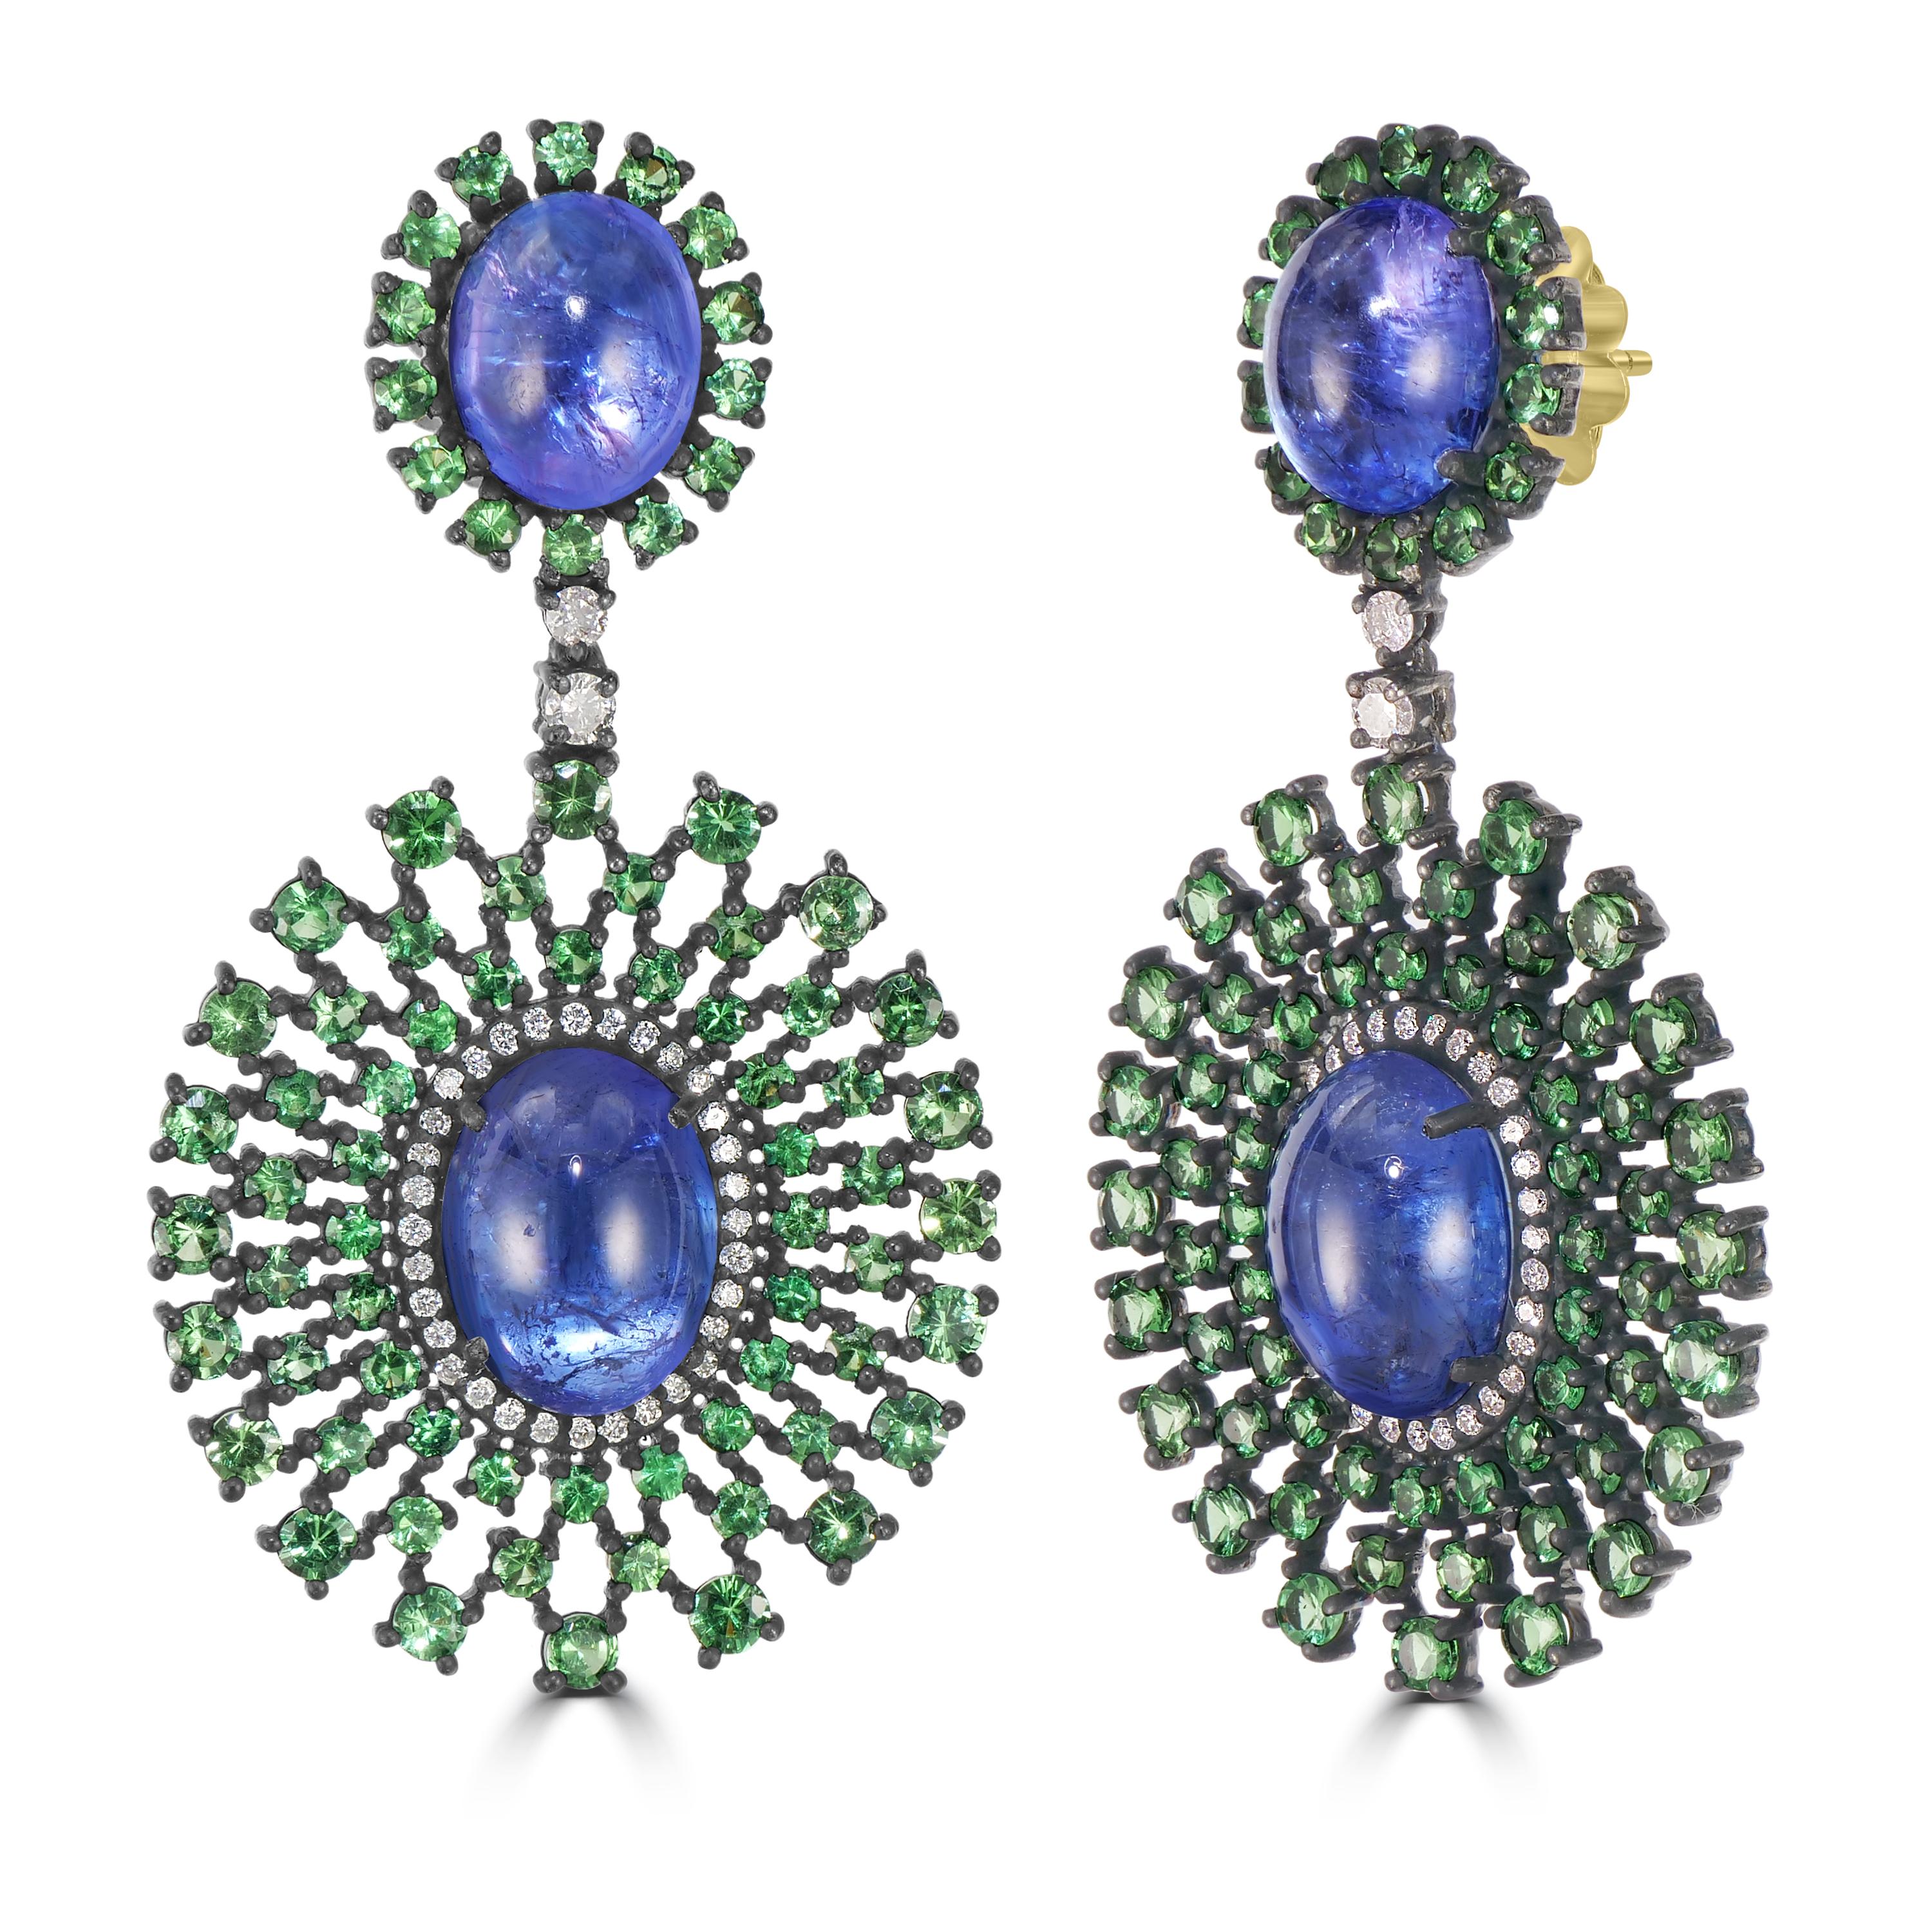 Introducing our Victorian 26.28 Cttw. Tanzanite, Tsavorite, and Diamond Dangle Earrings—a floral symphony that celebrates the allure of precious gemstones and the artistry of Victorian design.

At the heart of these captivating earrings is an oval